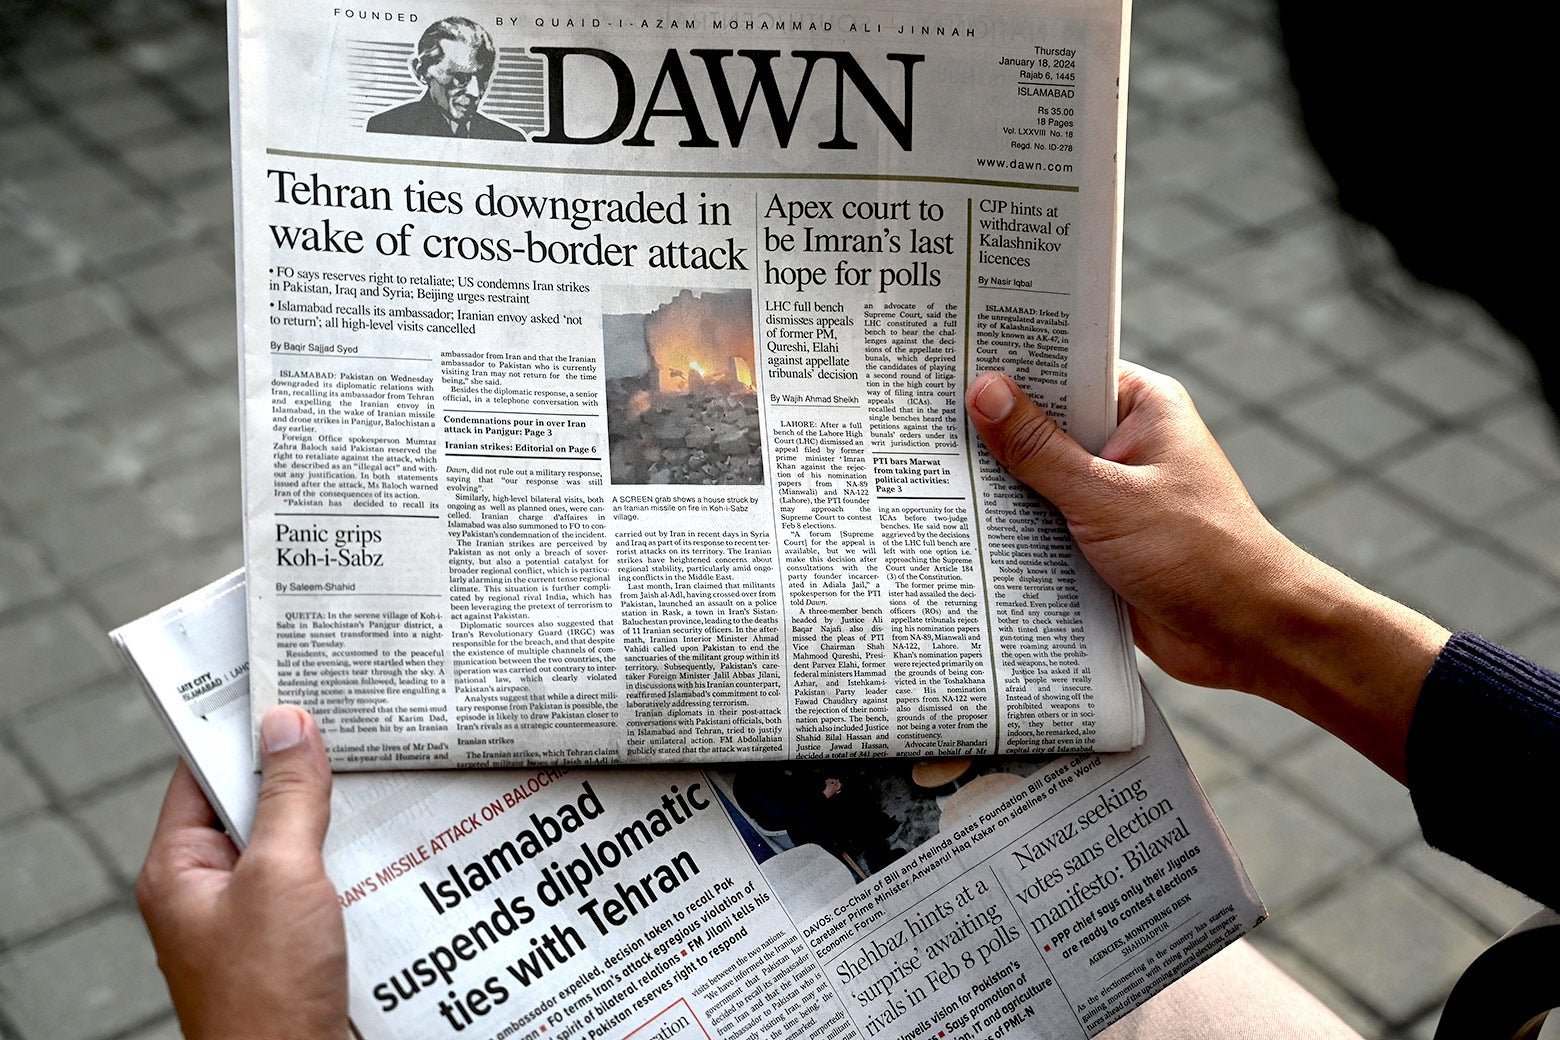 A man reads the front page of the Pakistani English-language newspaper Dawn displaying news on Iran’s airstrike, in Islamabad on Thursday. The headline reads "Iran ties downgraded in wake of cross-border attack."